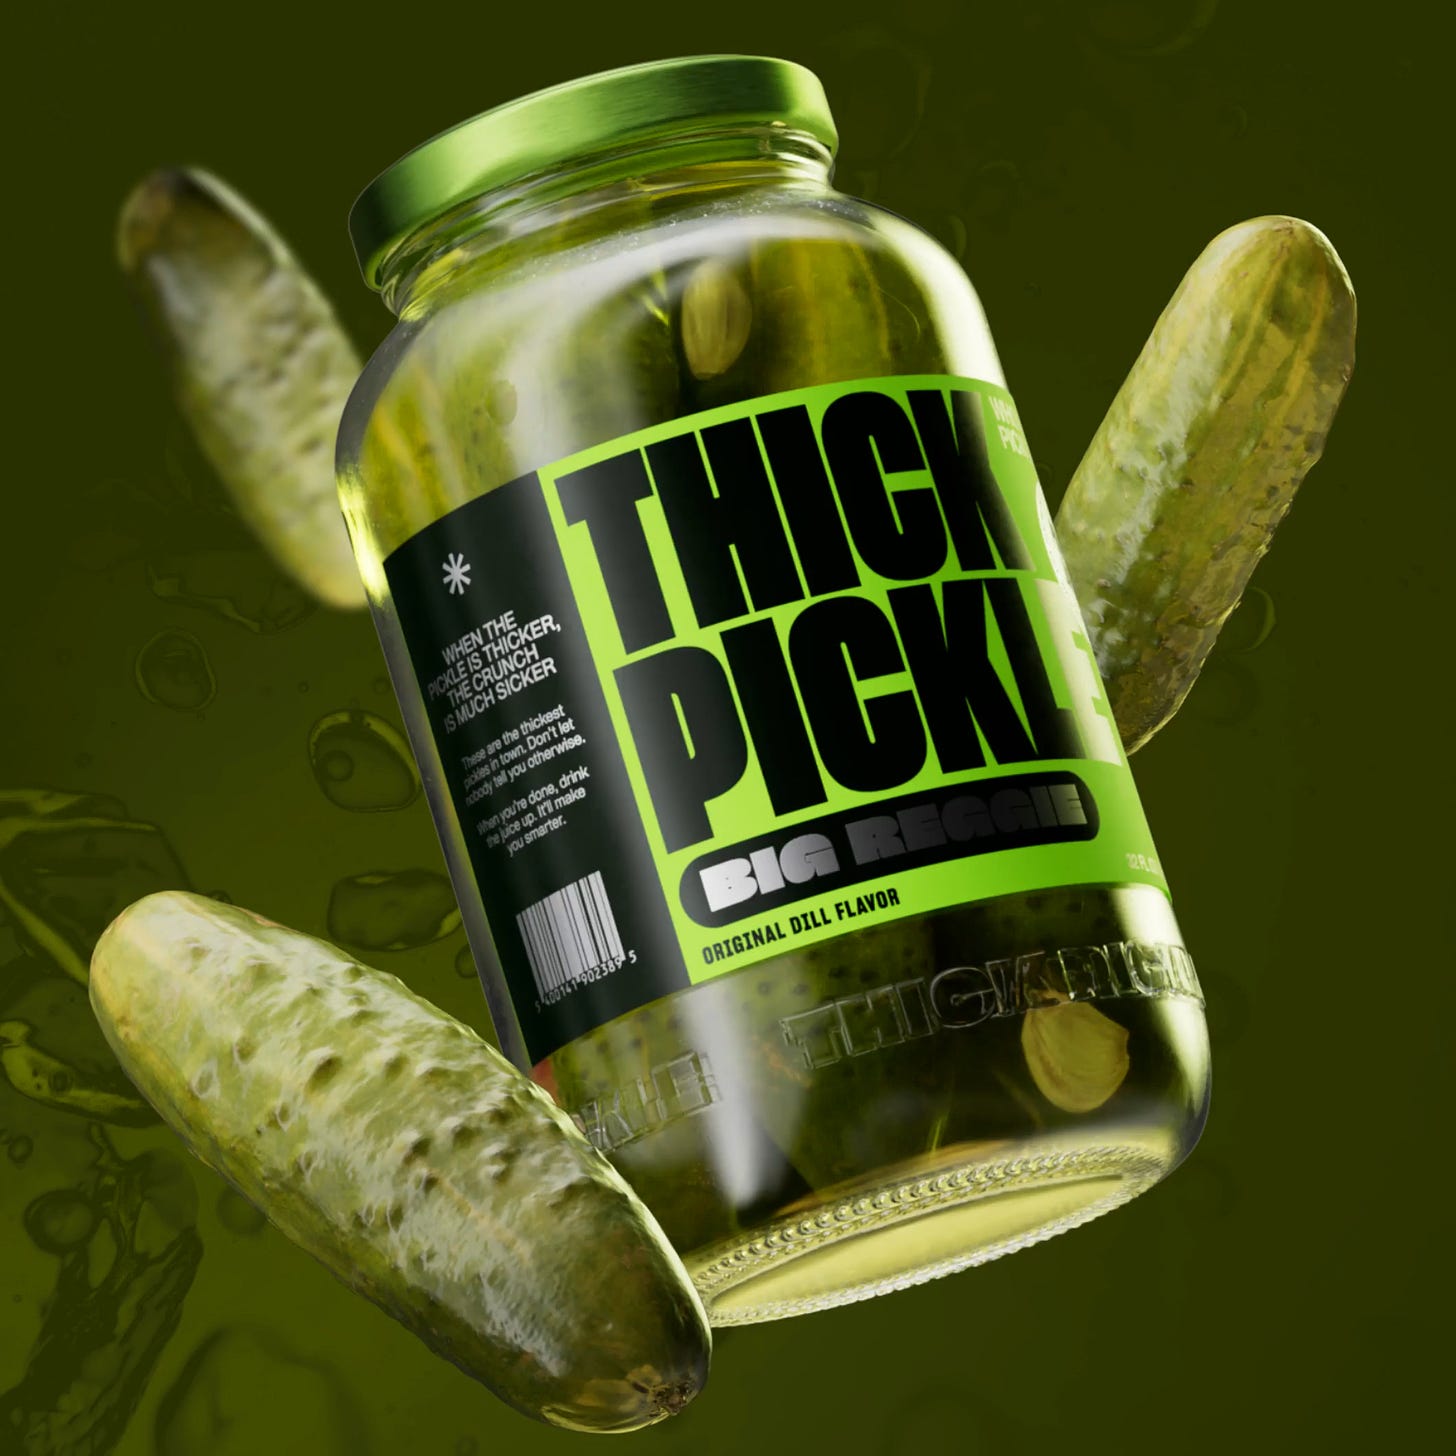 Thick Pickle branding by Study Hall